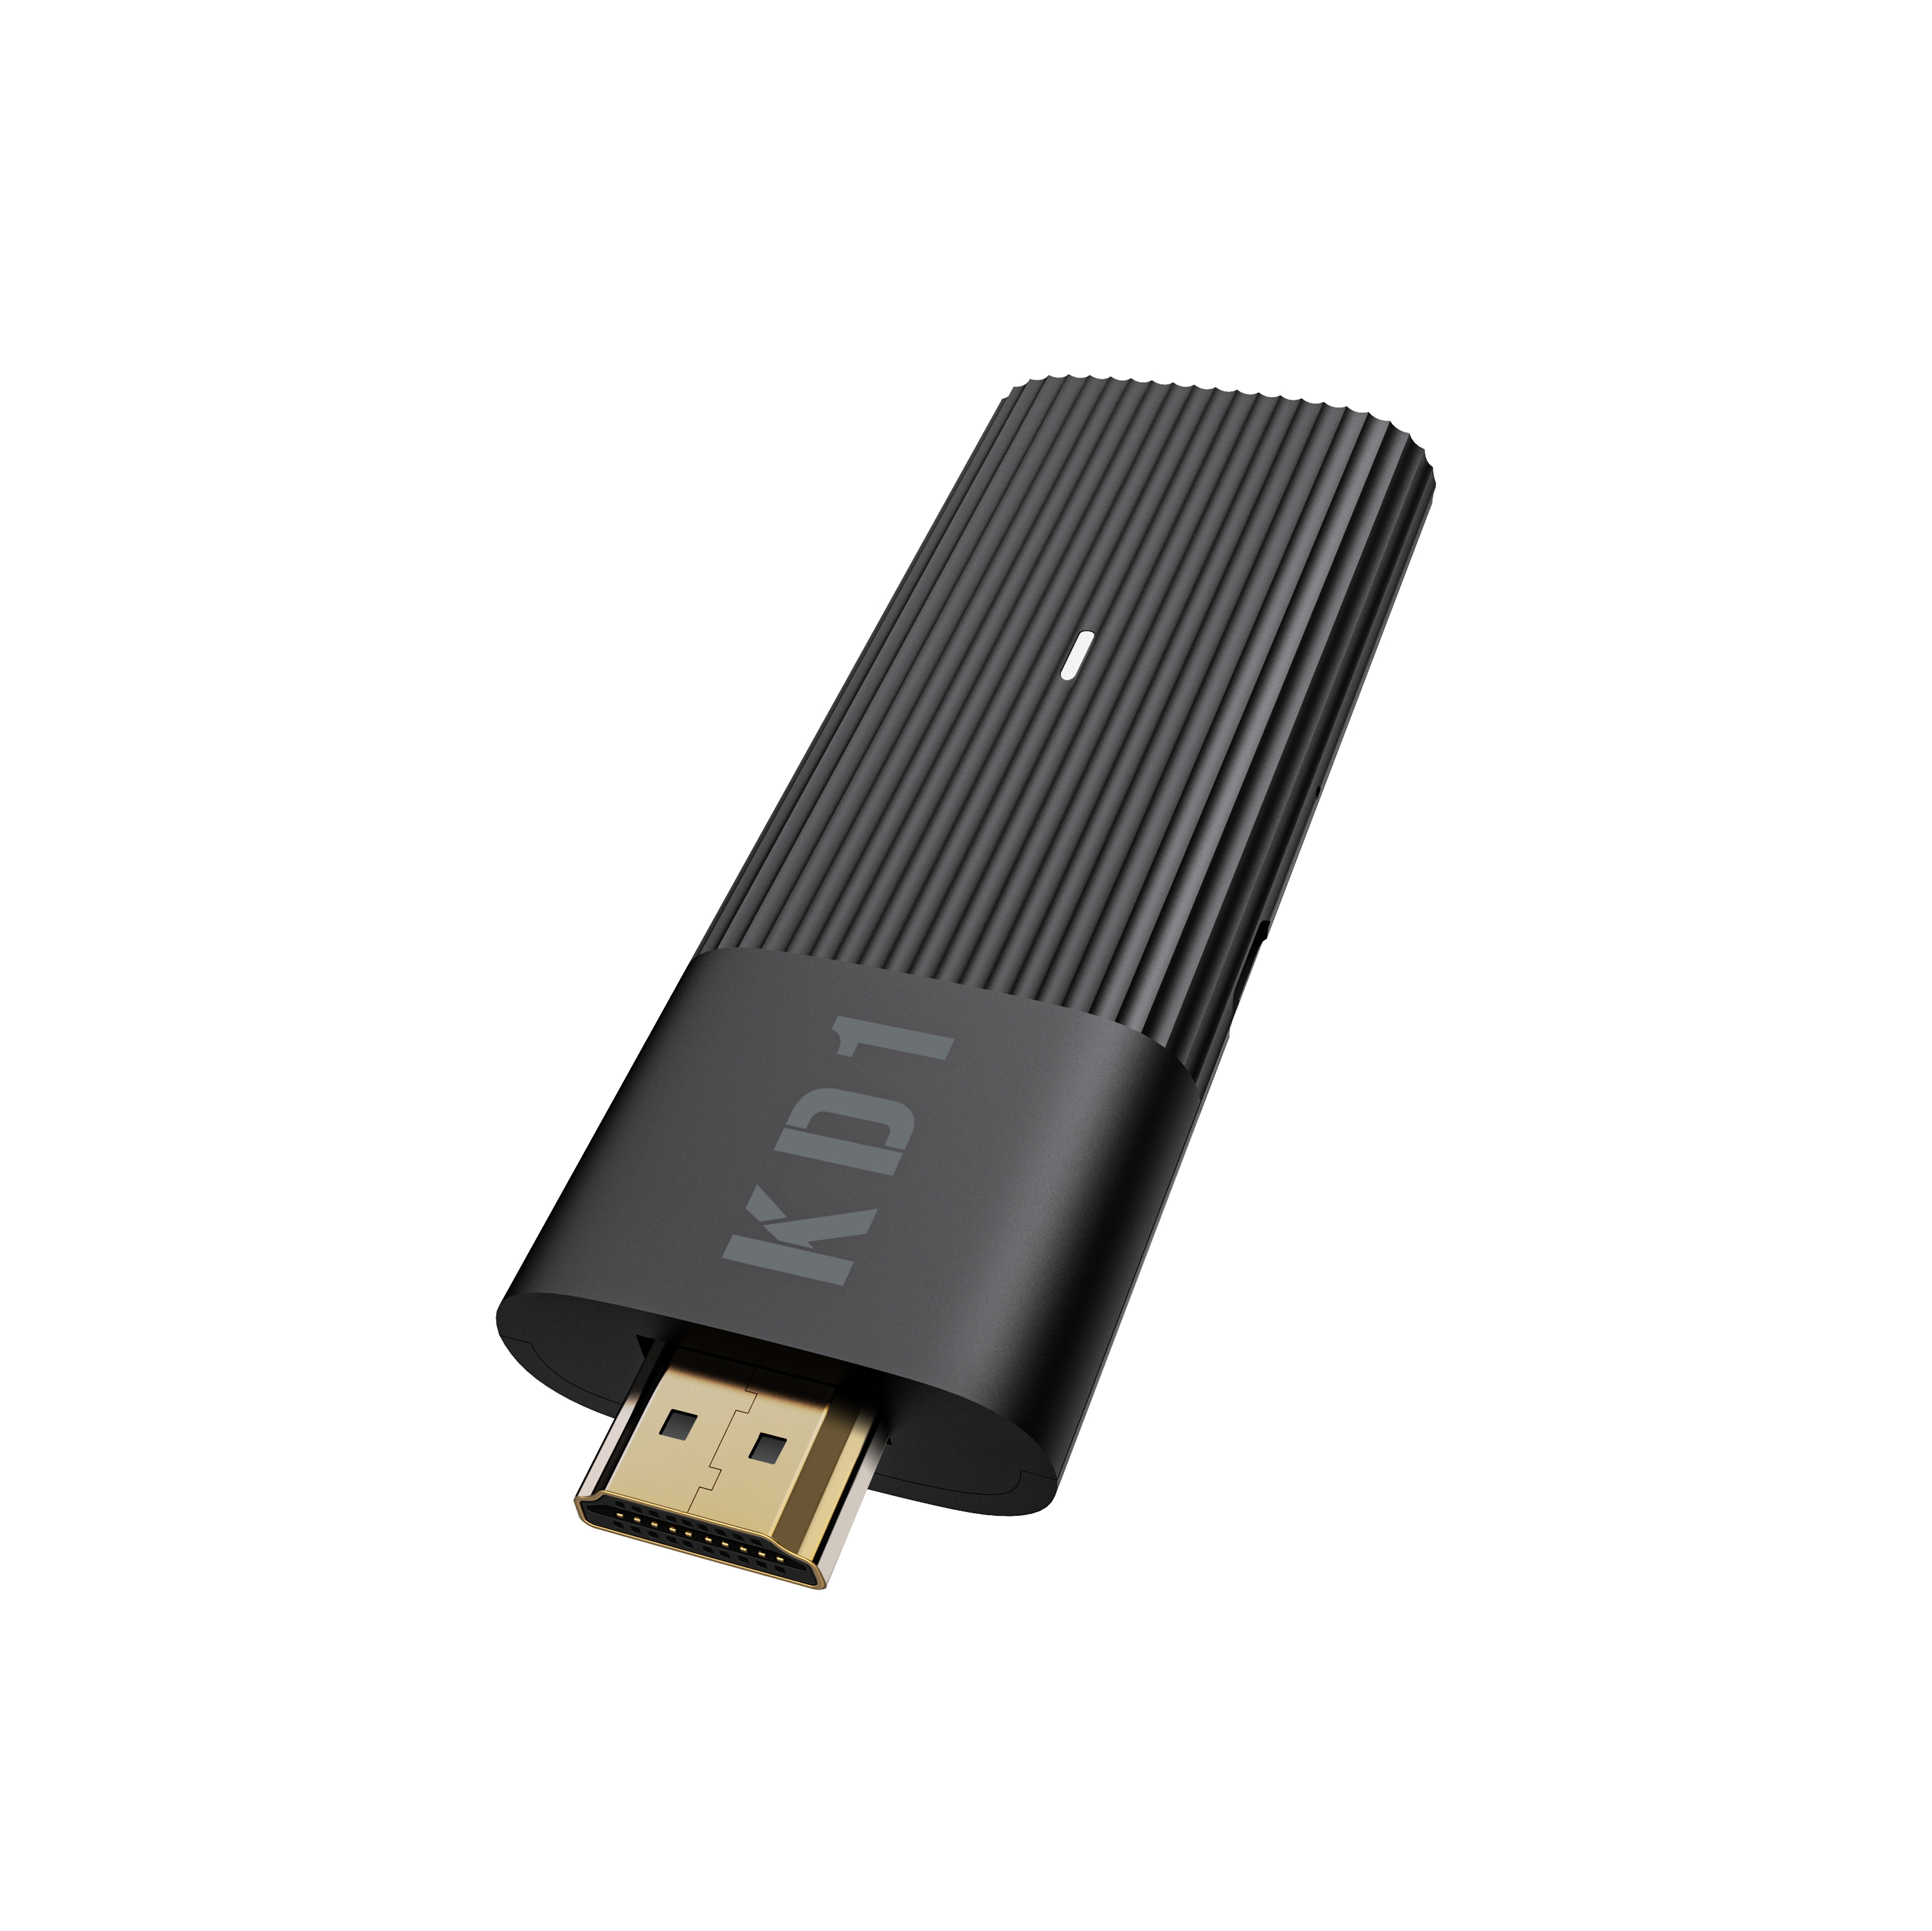 Find MECOOL KD1 TV Stick Amlogic S905Y2 2GB RAM 16GB ROM BT4 2 2 4G 5G WiFi Android 10 ATV OS 4K HDR10 Streaming Media Player for Sale on Gipsybee.com with cryptocurrencies